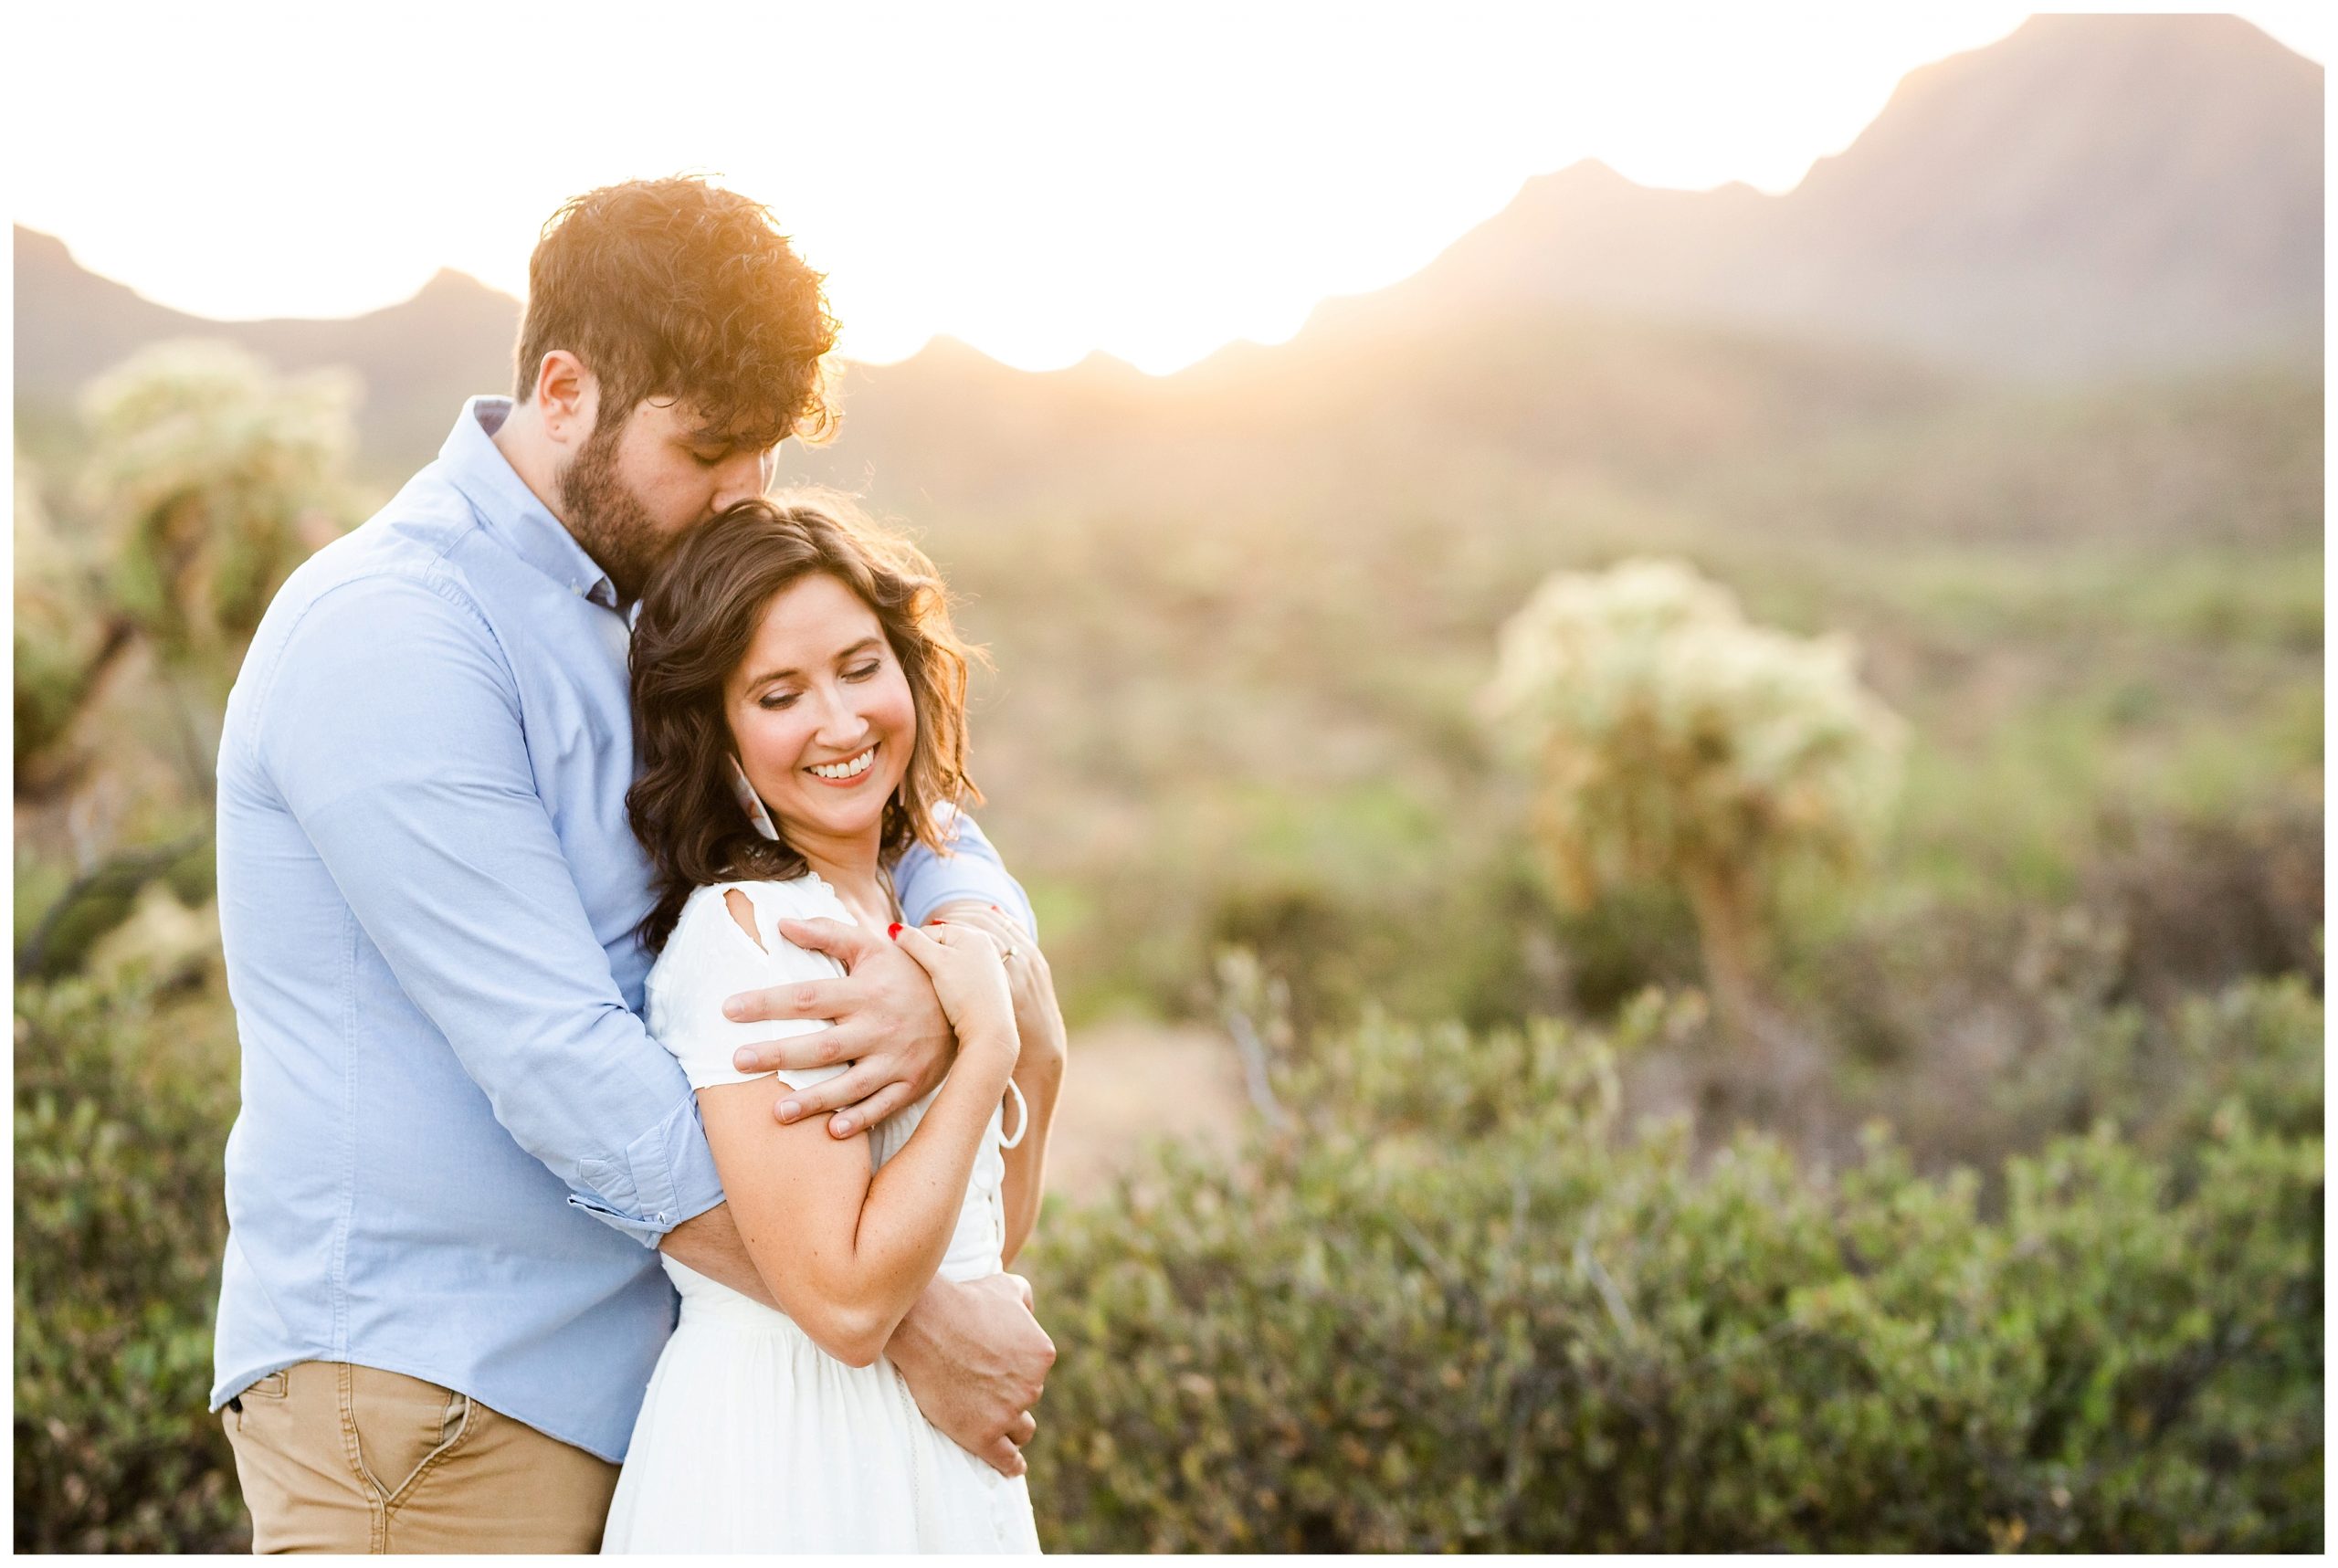 Desert scenery with engaged couple snuggling